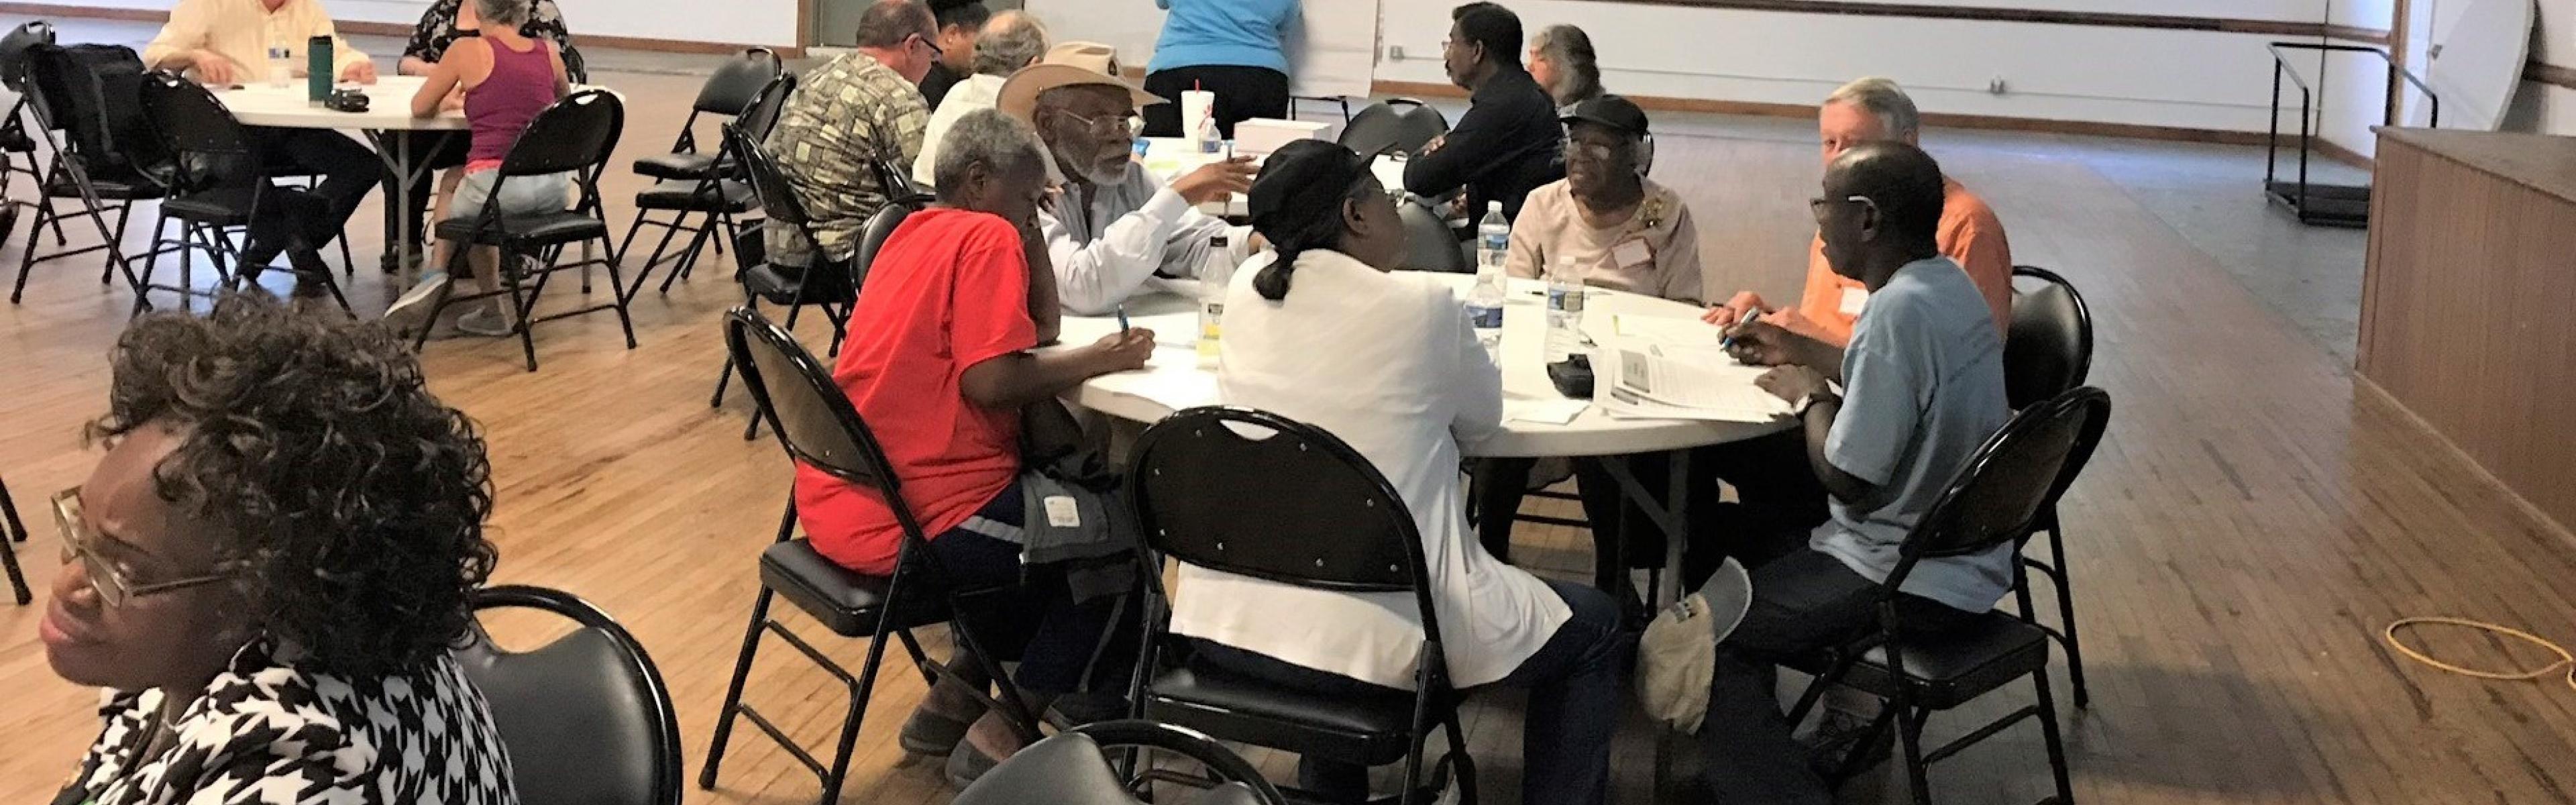 New Bern community meeting with residents sitting around tables